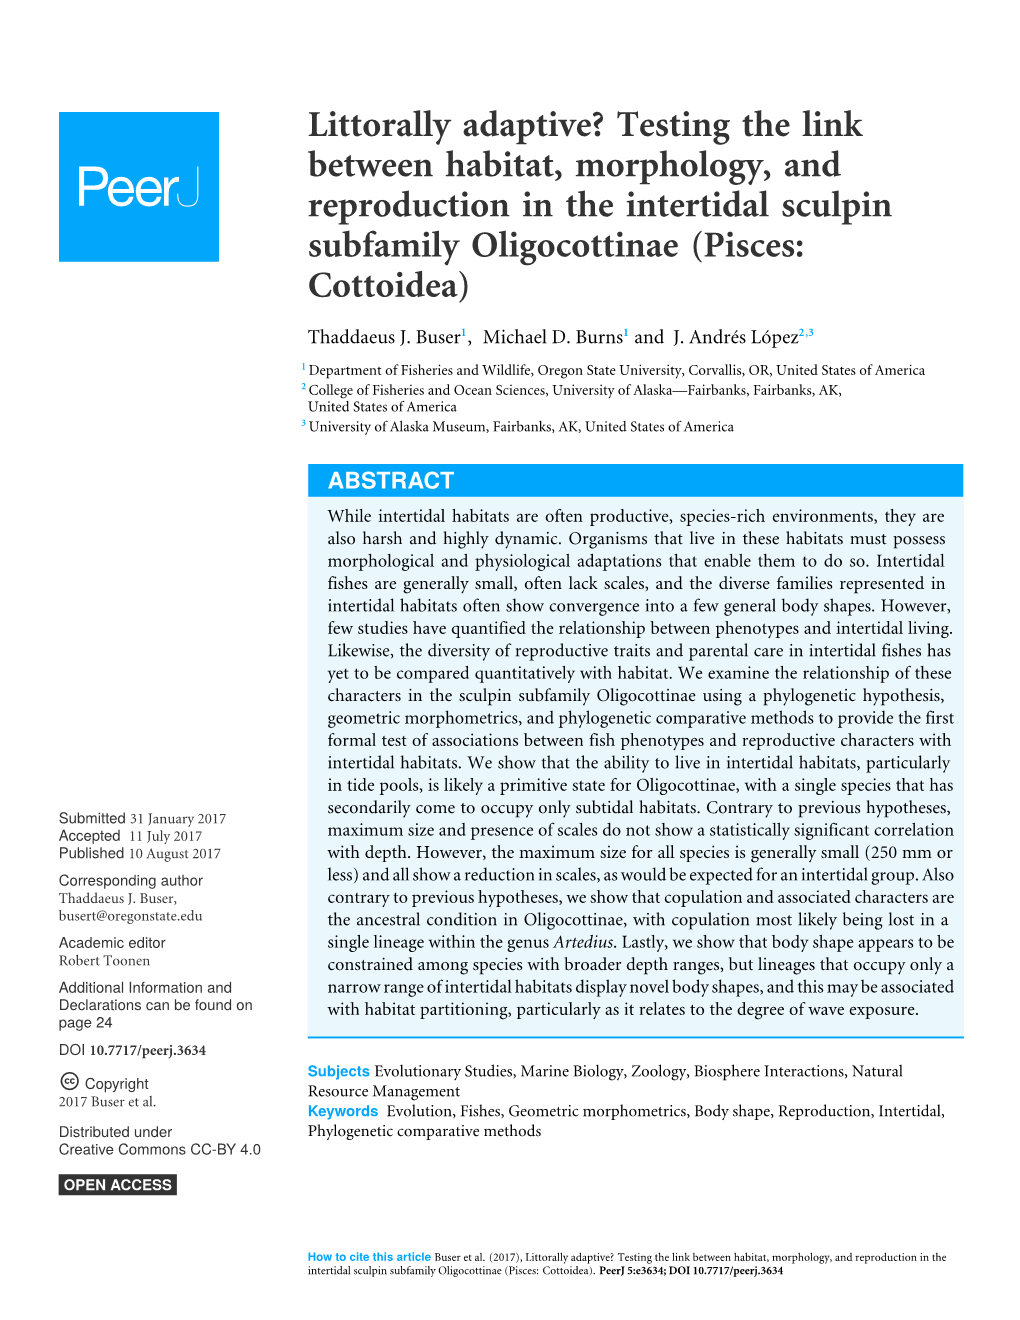 Testing the Link Between Habitat, Morphology, and Reproduction in the Intertidal Sculpin Subfamily Oligocottinae (Pisces: Cottoidea)